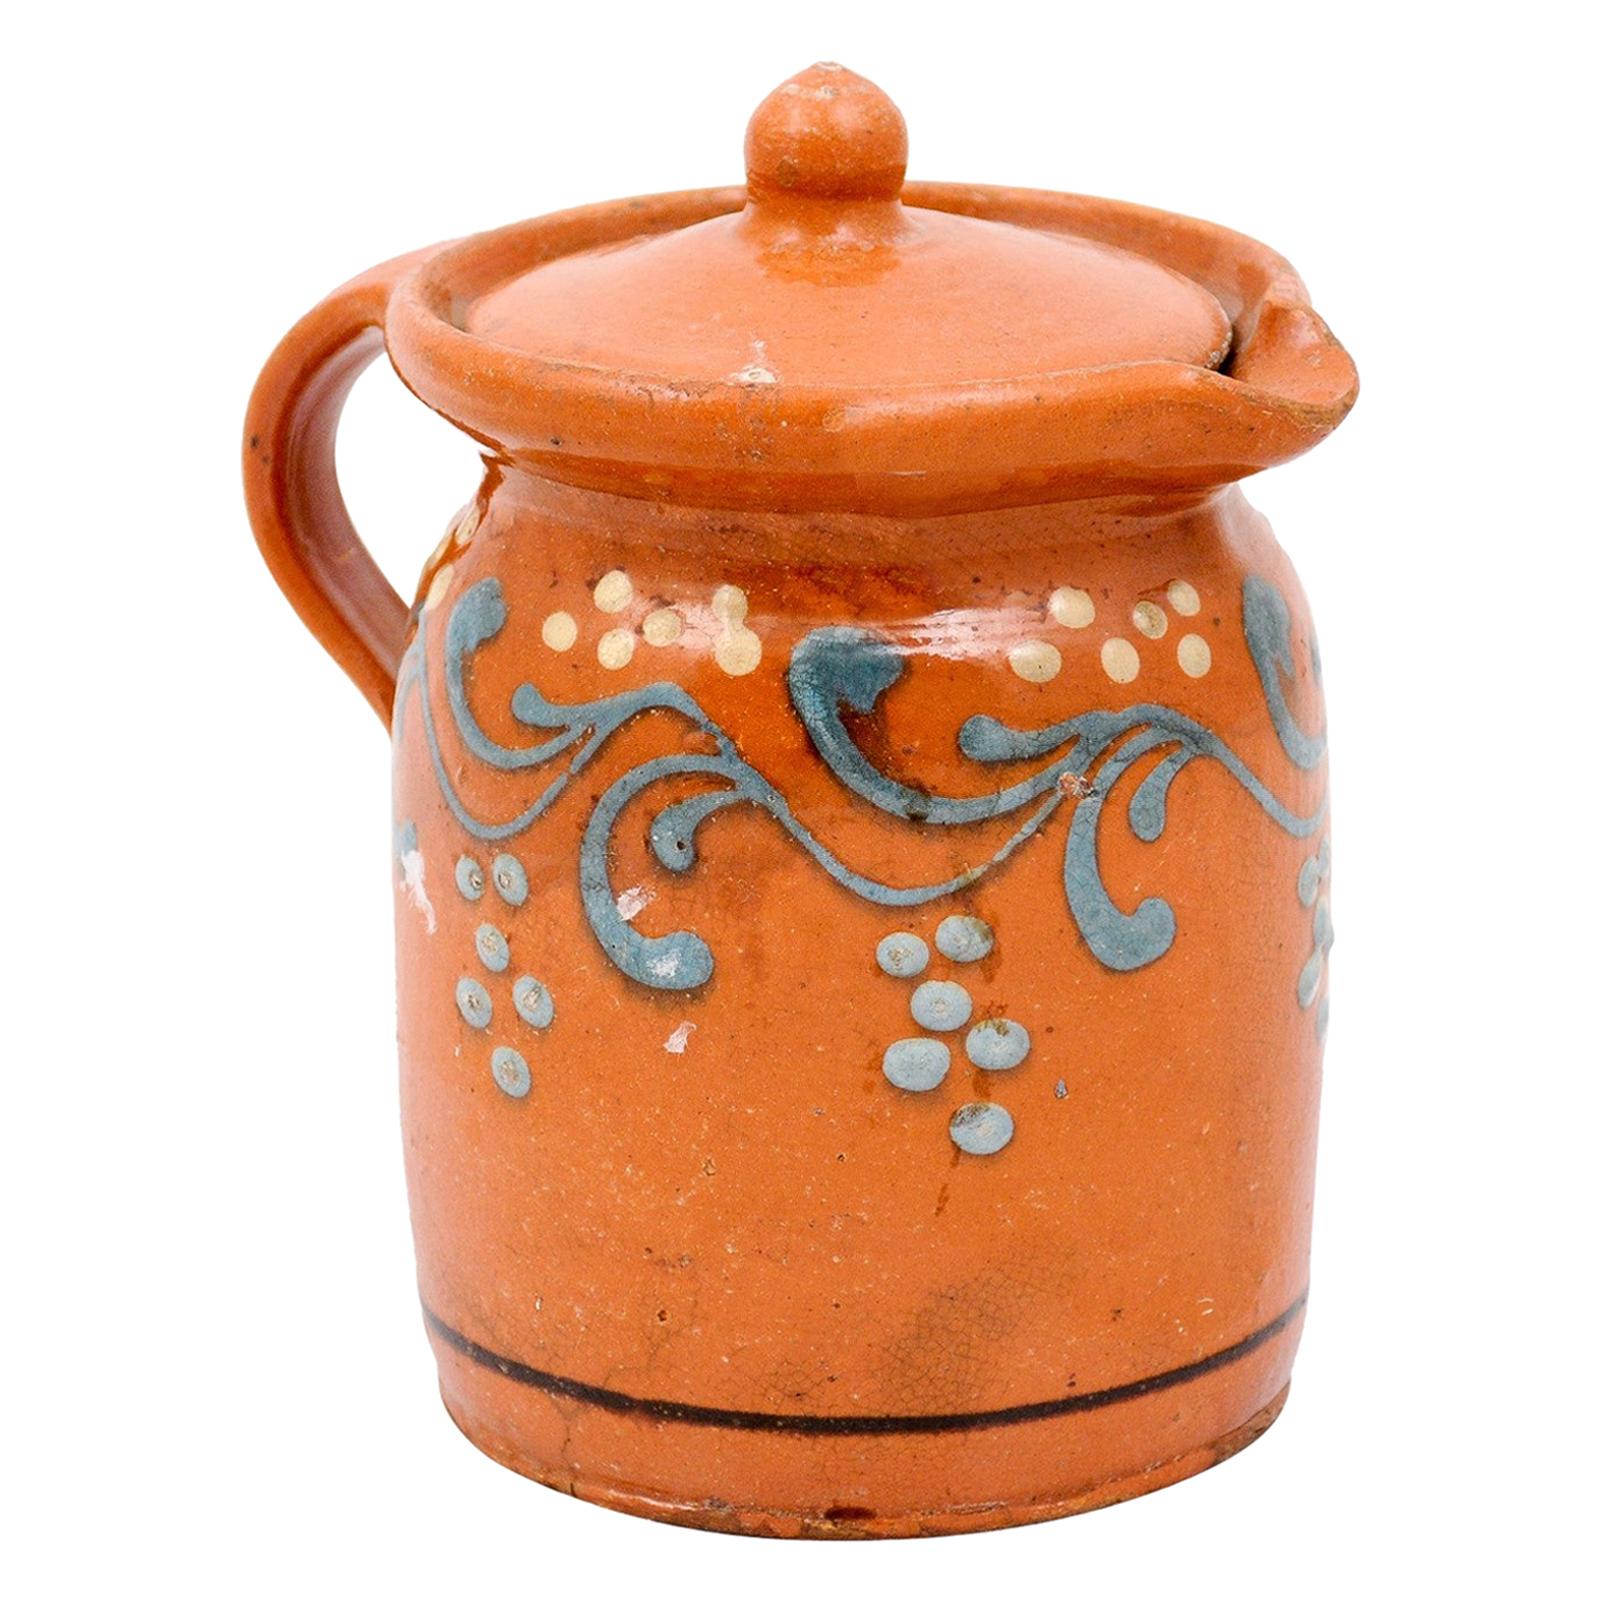 French 19th Century Pottery Pitcher with Orange and Blue Glaze and Foliage Motif